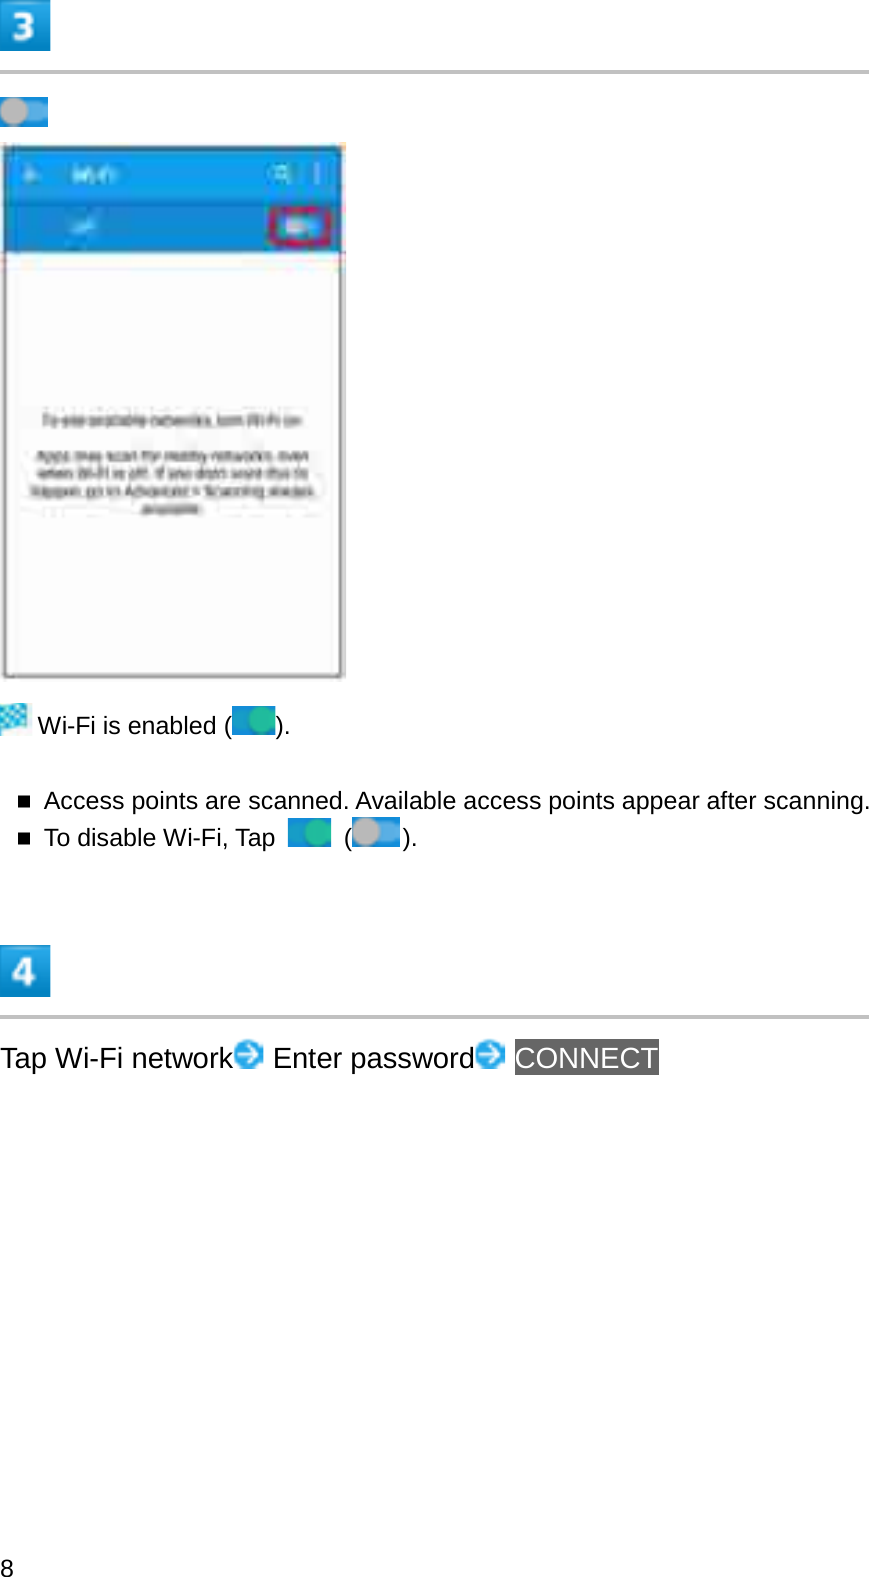 Wi-Fi is enabled ( ).Access points are scanned. Available access points appear after scanning.To disable Wi-Fi, Tap  ().Tap Wi-Fi network Enter password CONNECT8